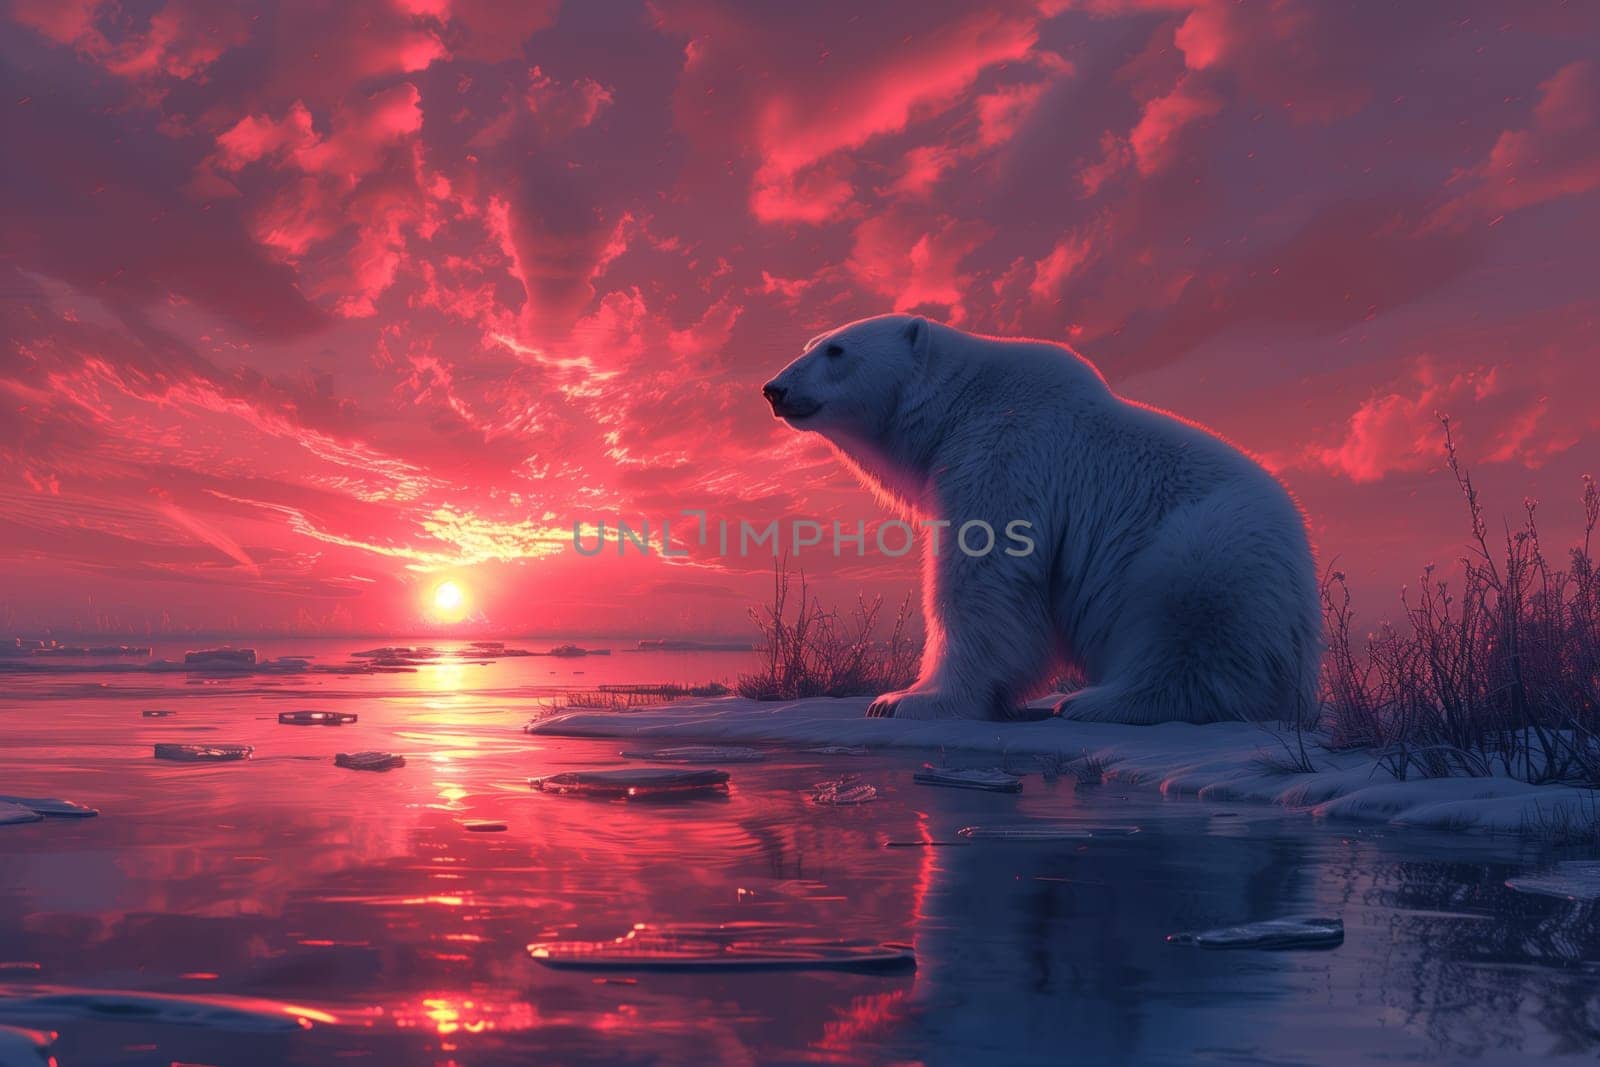 A carnivorous polar bear, a terrestrial animal, is sitting on a floating piece of ice, gazing at the sunset over the horizon, with a cloudy sky reflected in the liquid water below